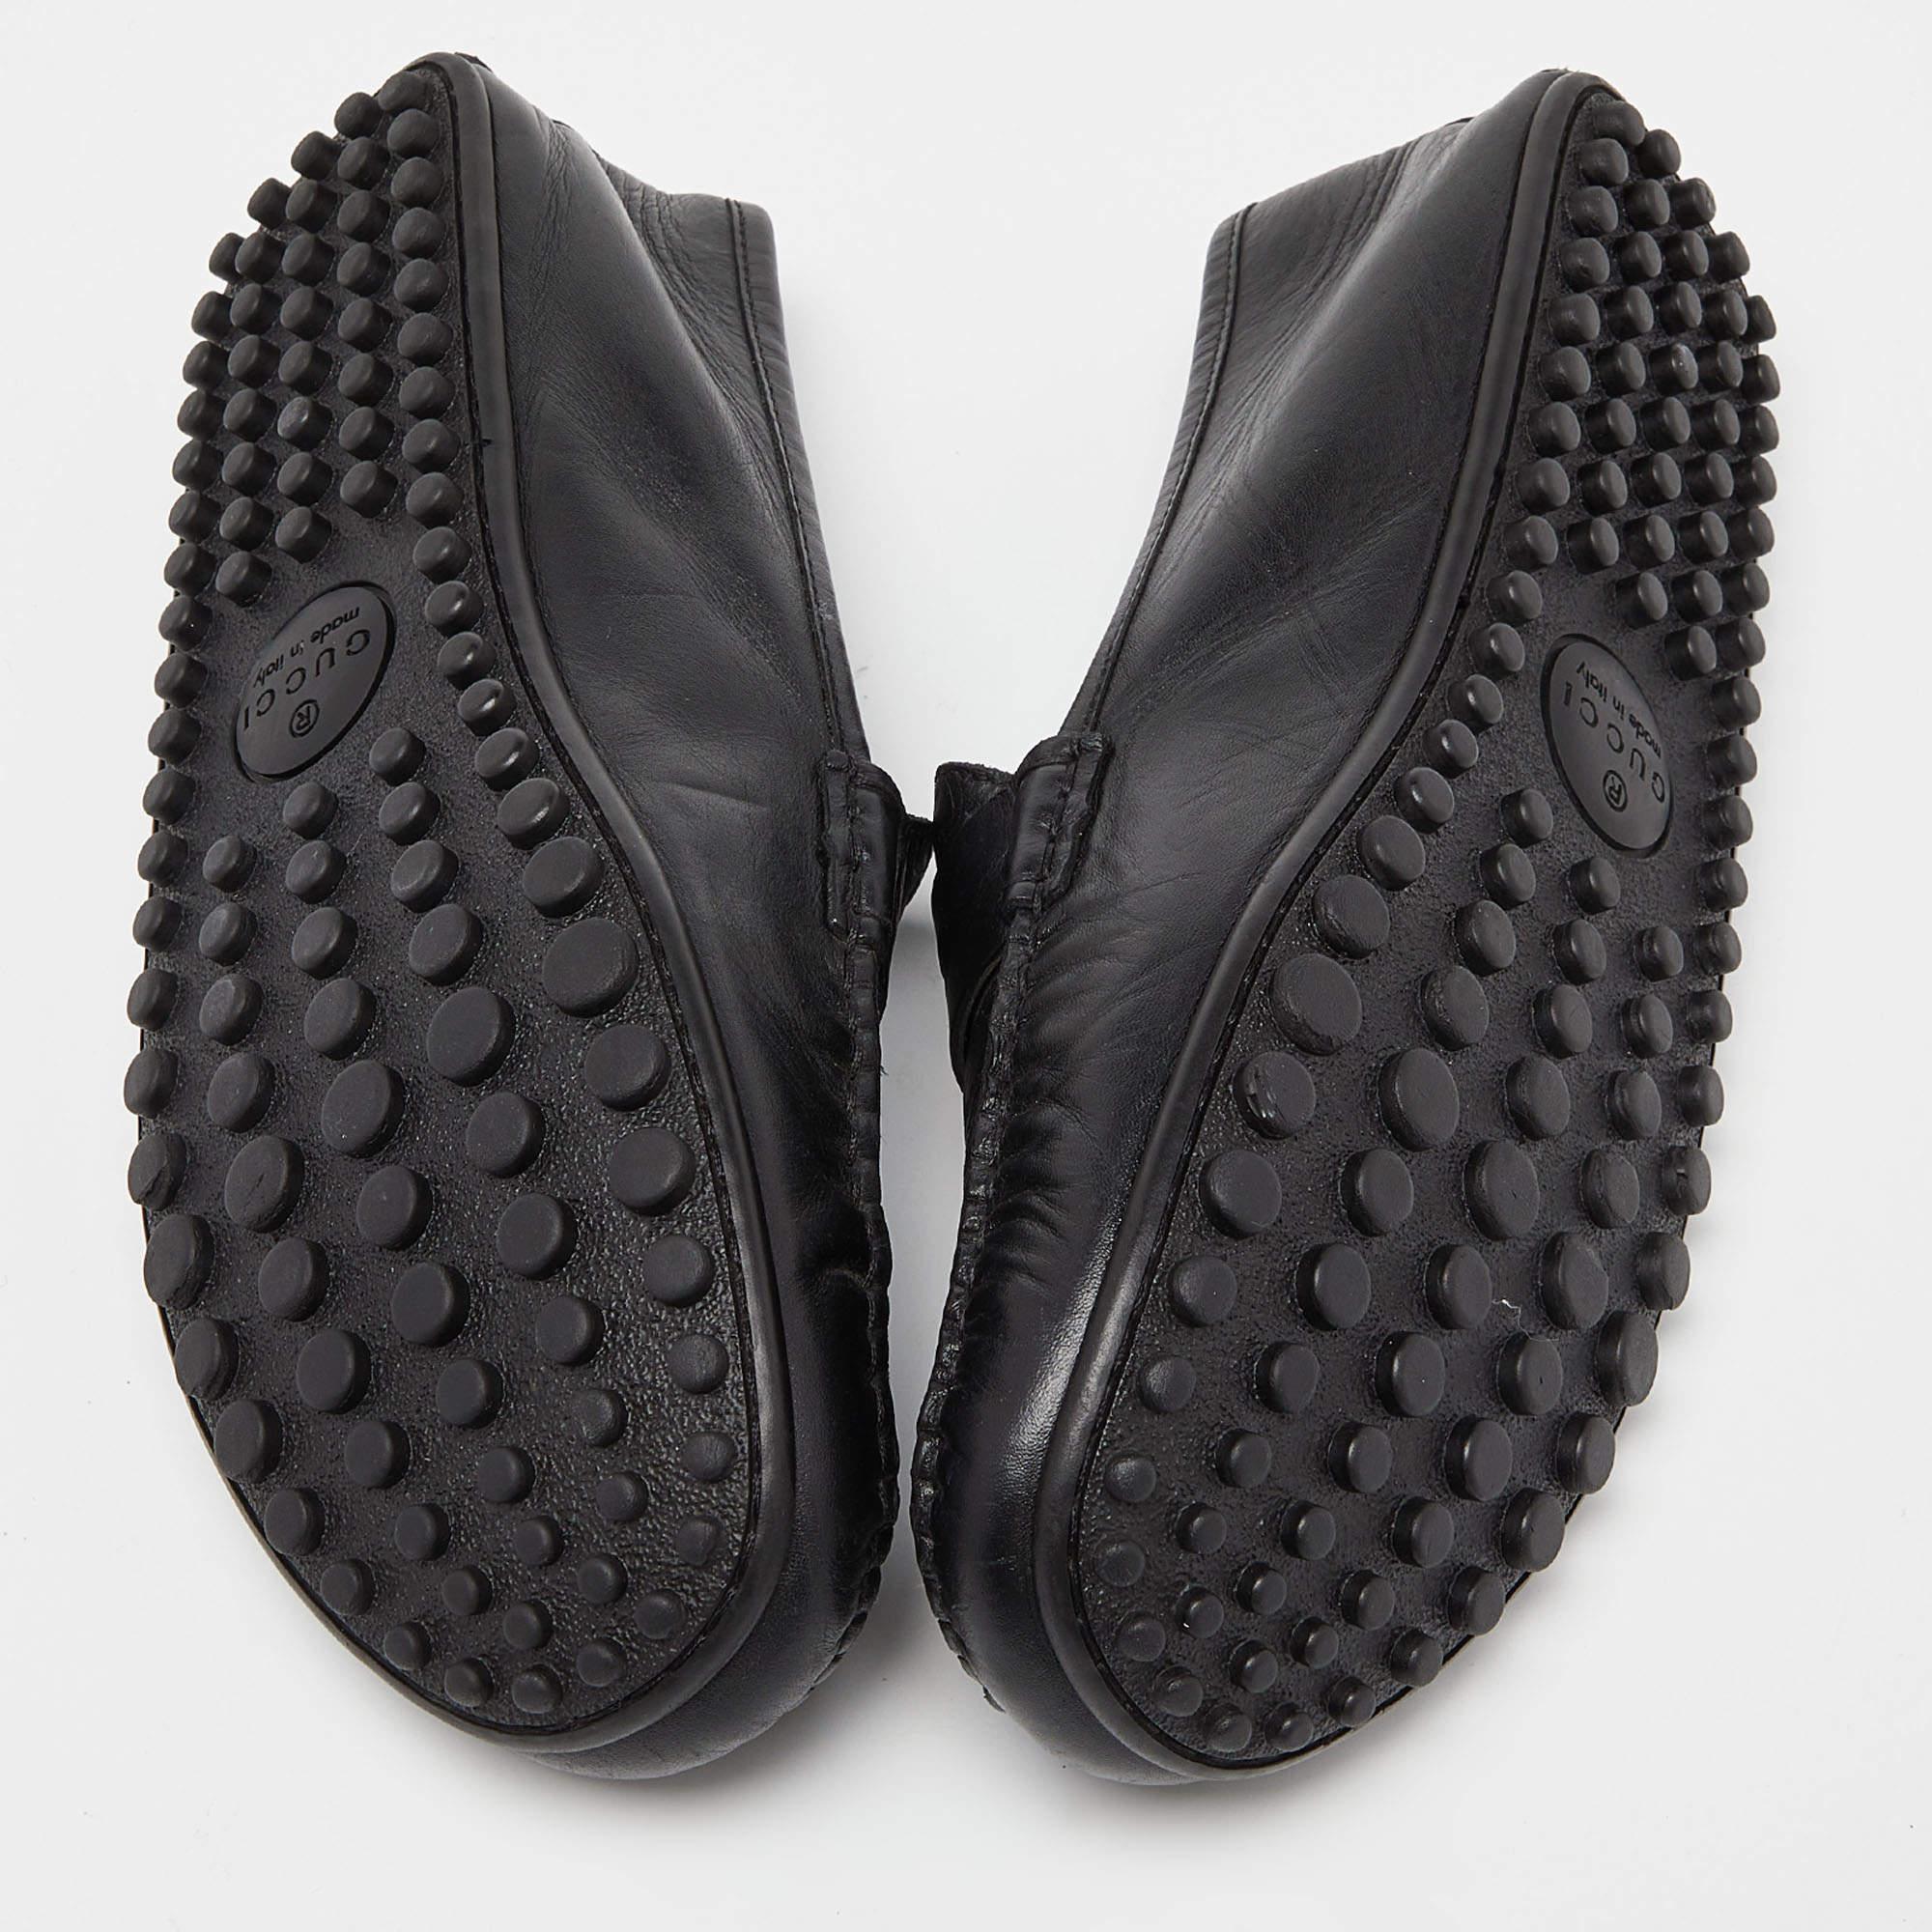 Gucci Black Guccissima Leather Penny Loafers Size 44 For Sale 1